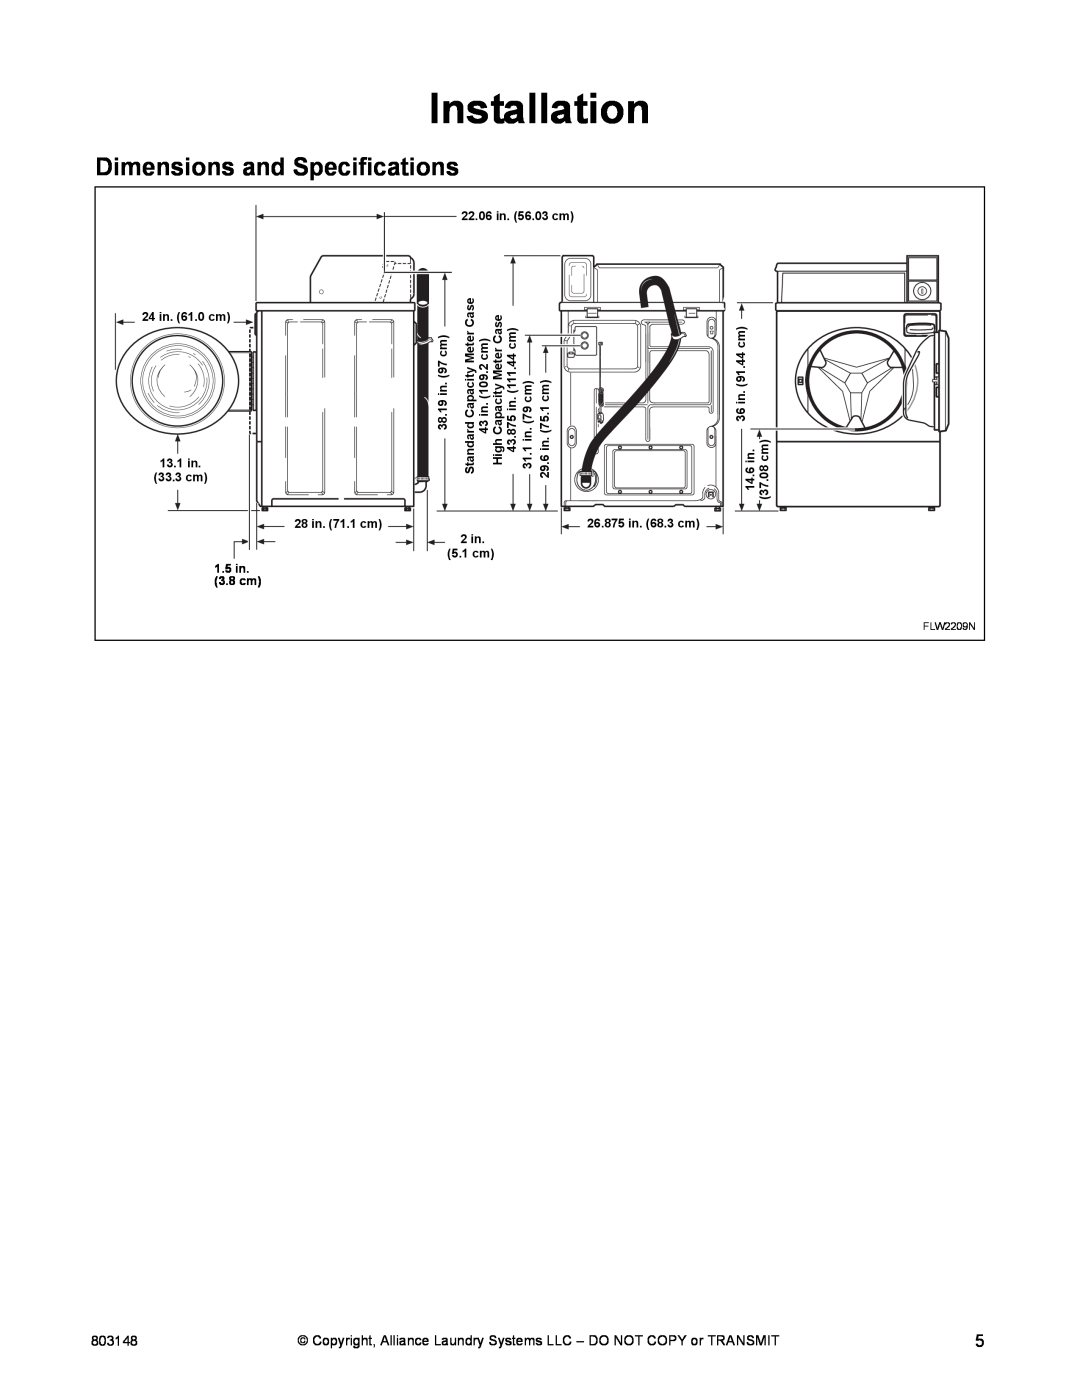 Alliance Laundry Systems FLW1526C manual Installation, Dimensions and Specifications 